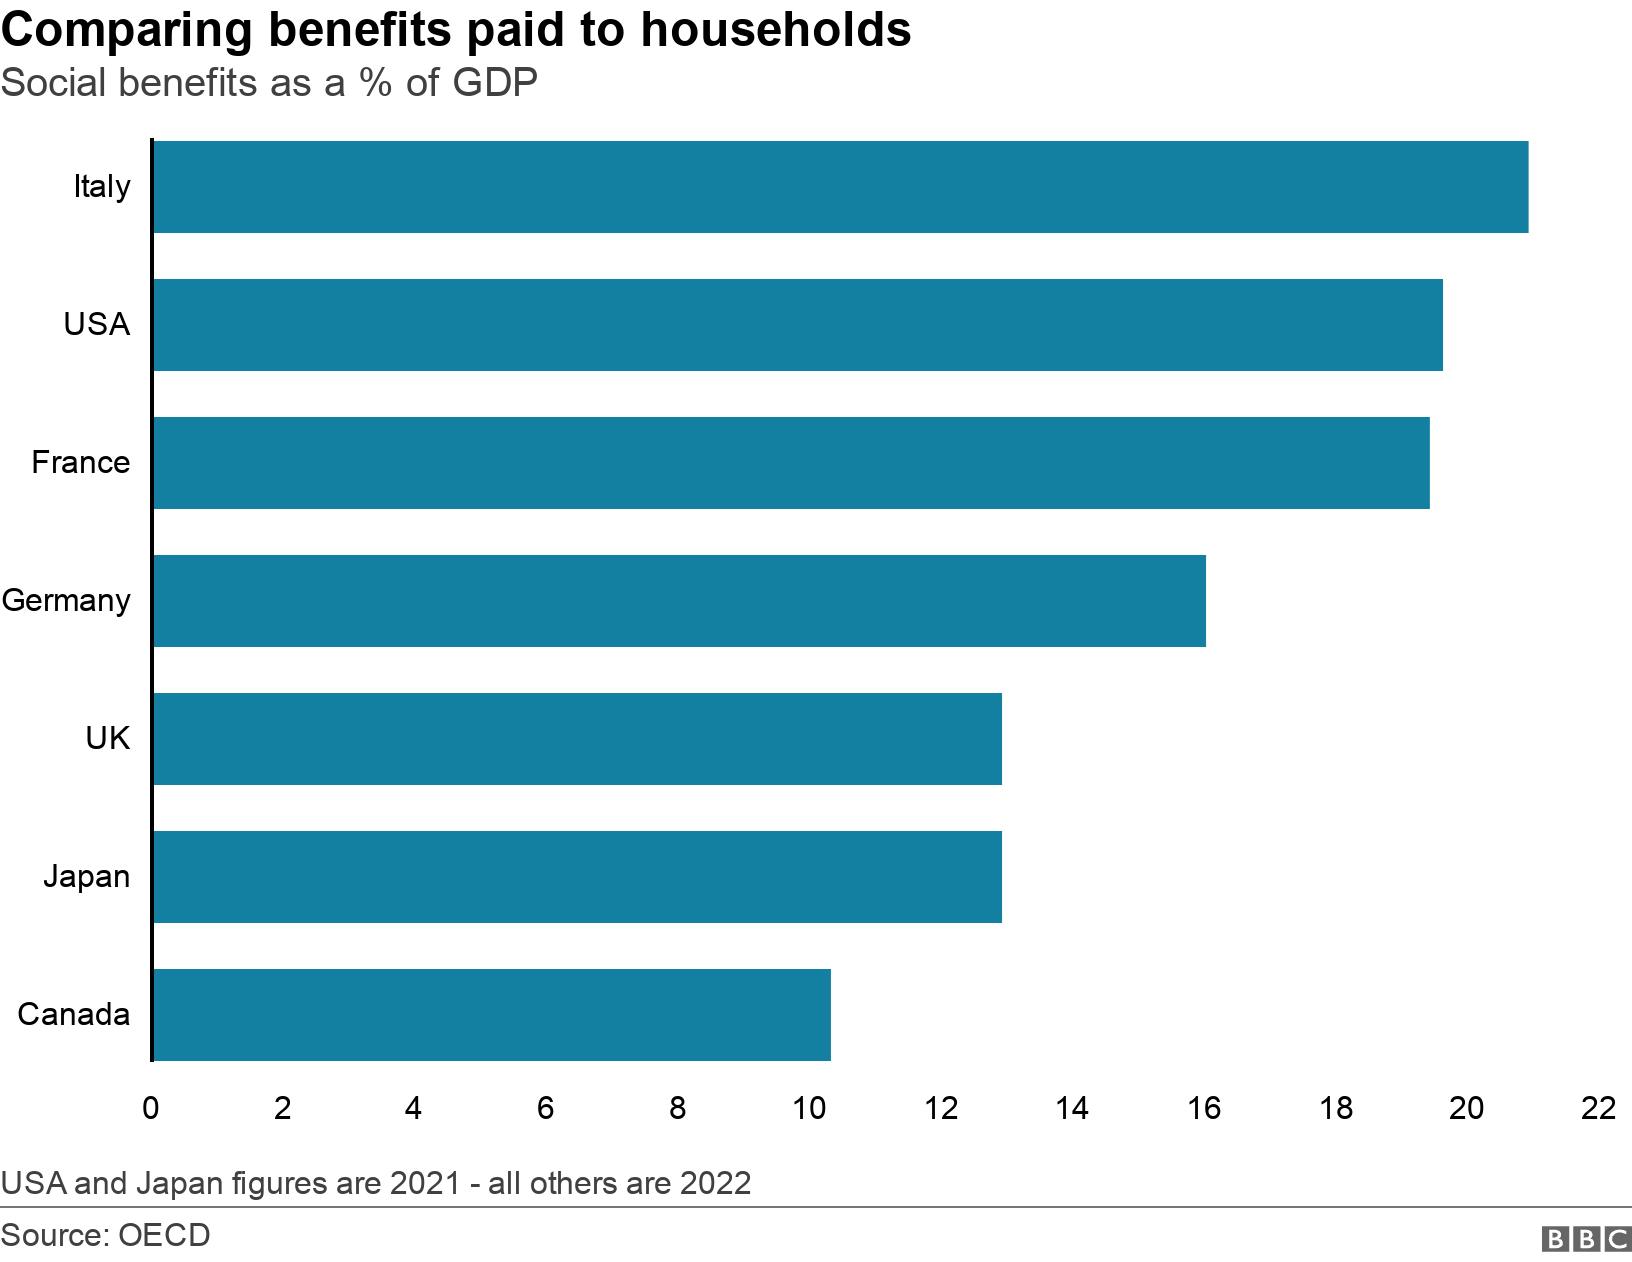 Comparing benefits paid to households. Social benefits as a % of GDP.  USA and Japan figures are 2021 - all others are 2022.